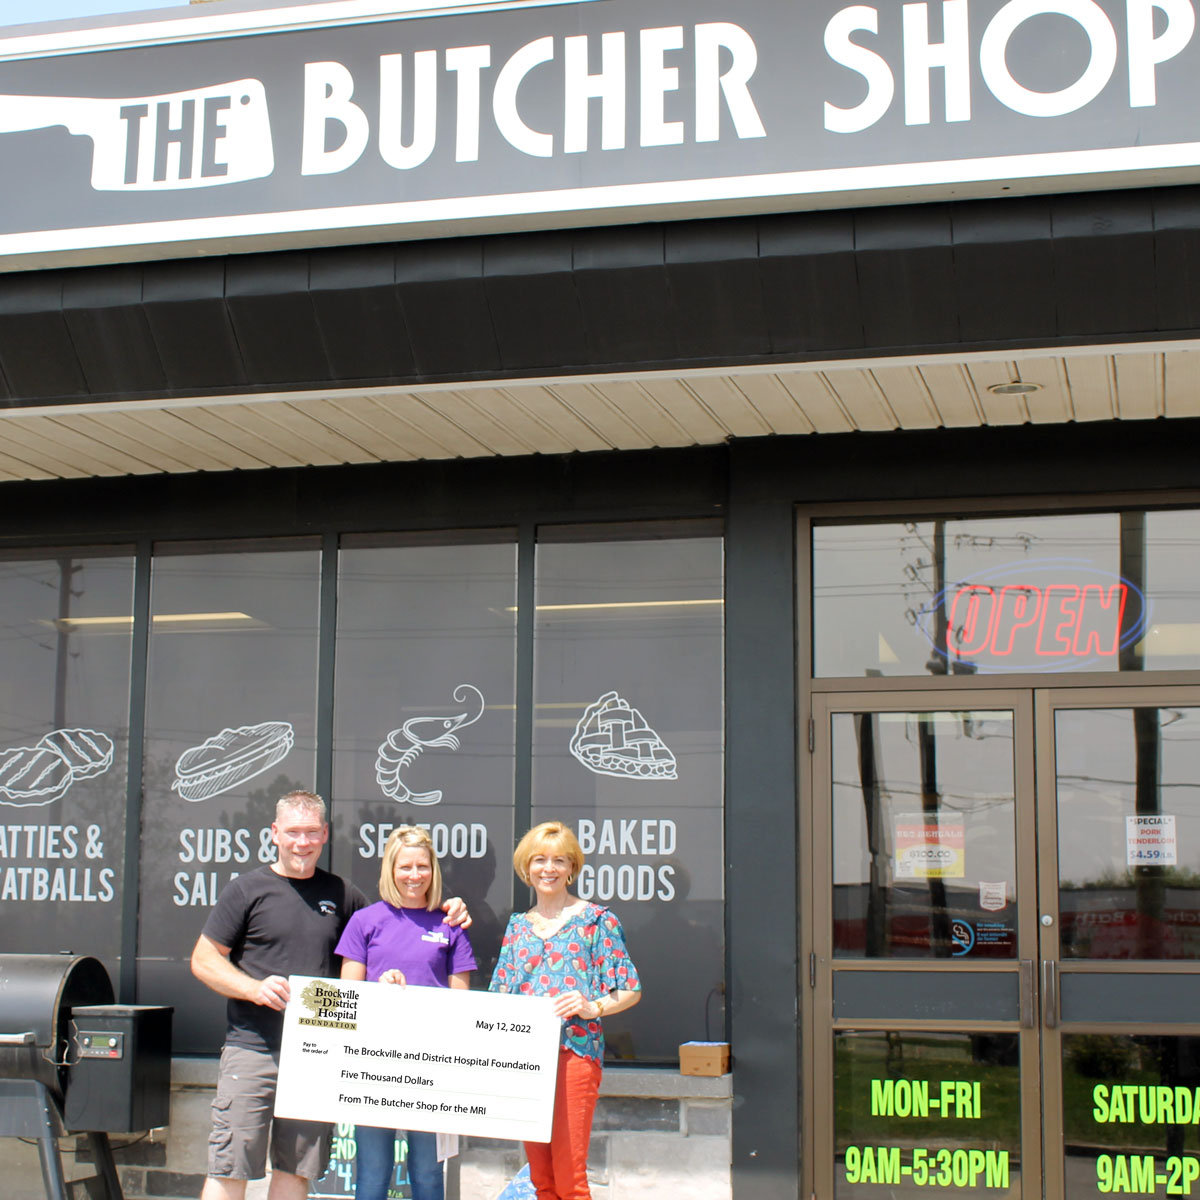 THE BUTCHER SHOP INC. FINDS A COOL WAY TO SUPPORT BROCKVILLE GENERAL HOSPITAL